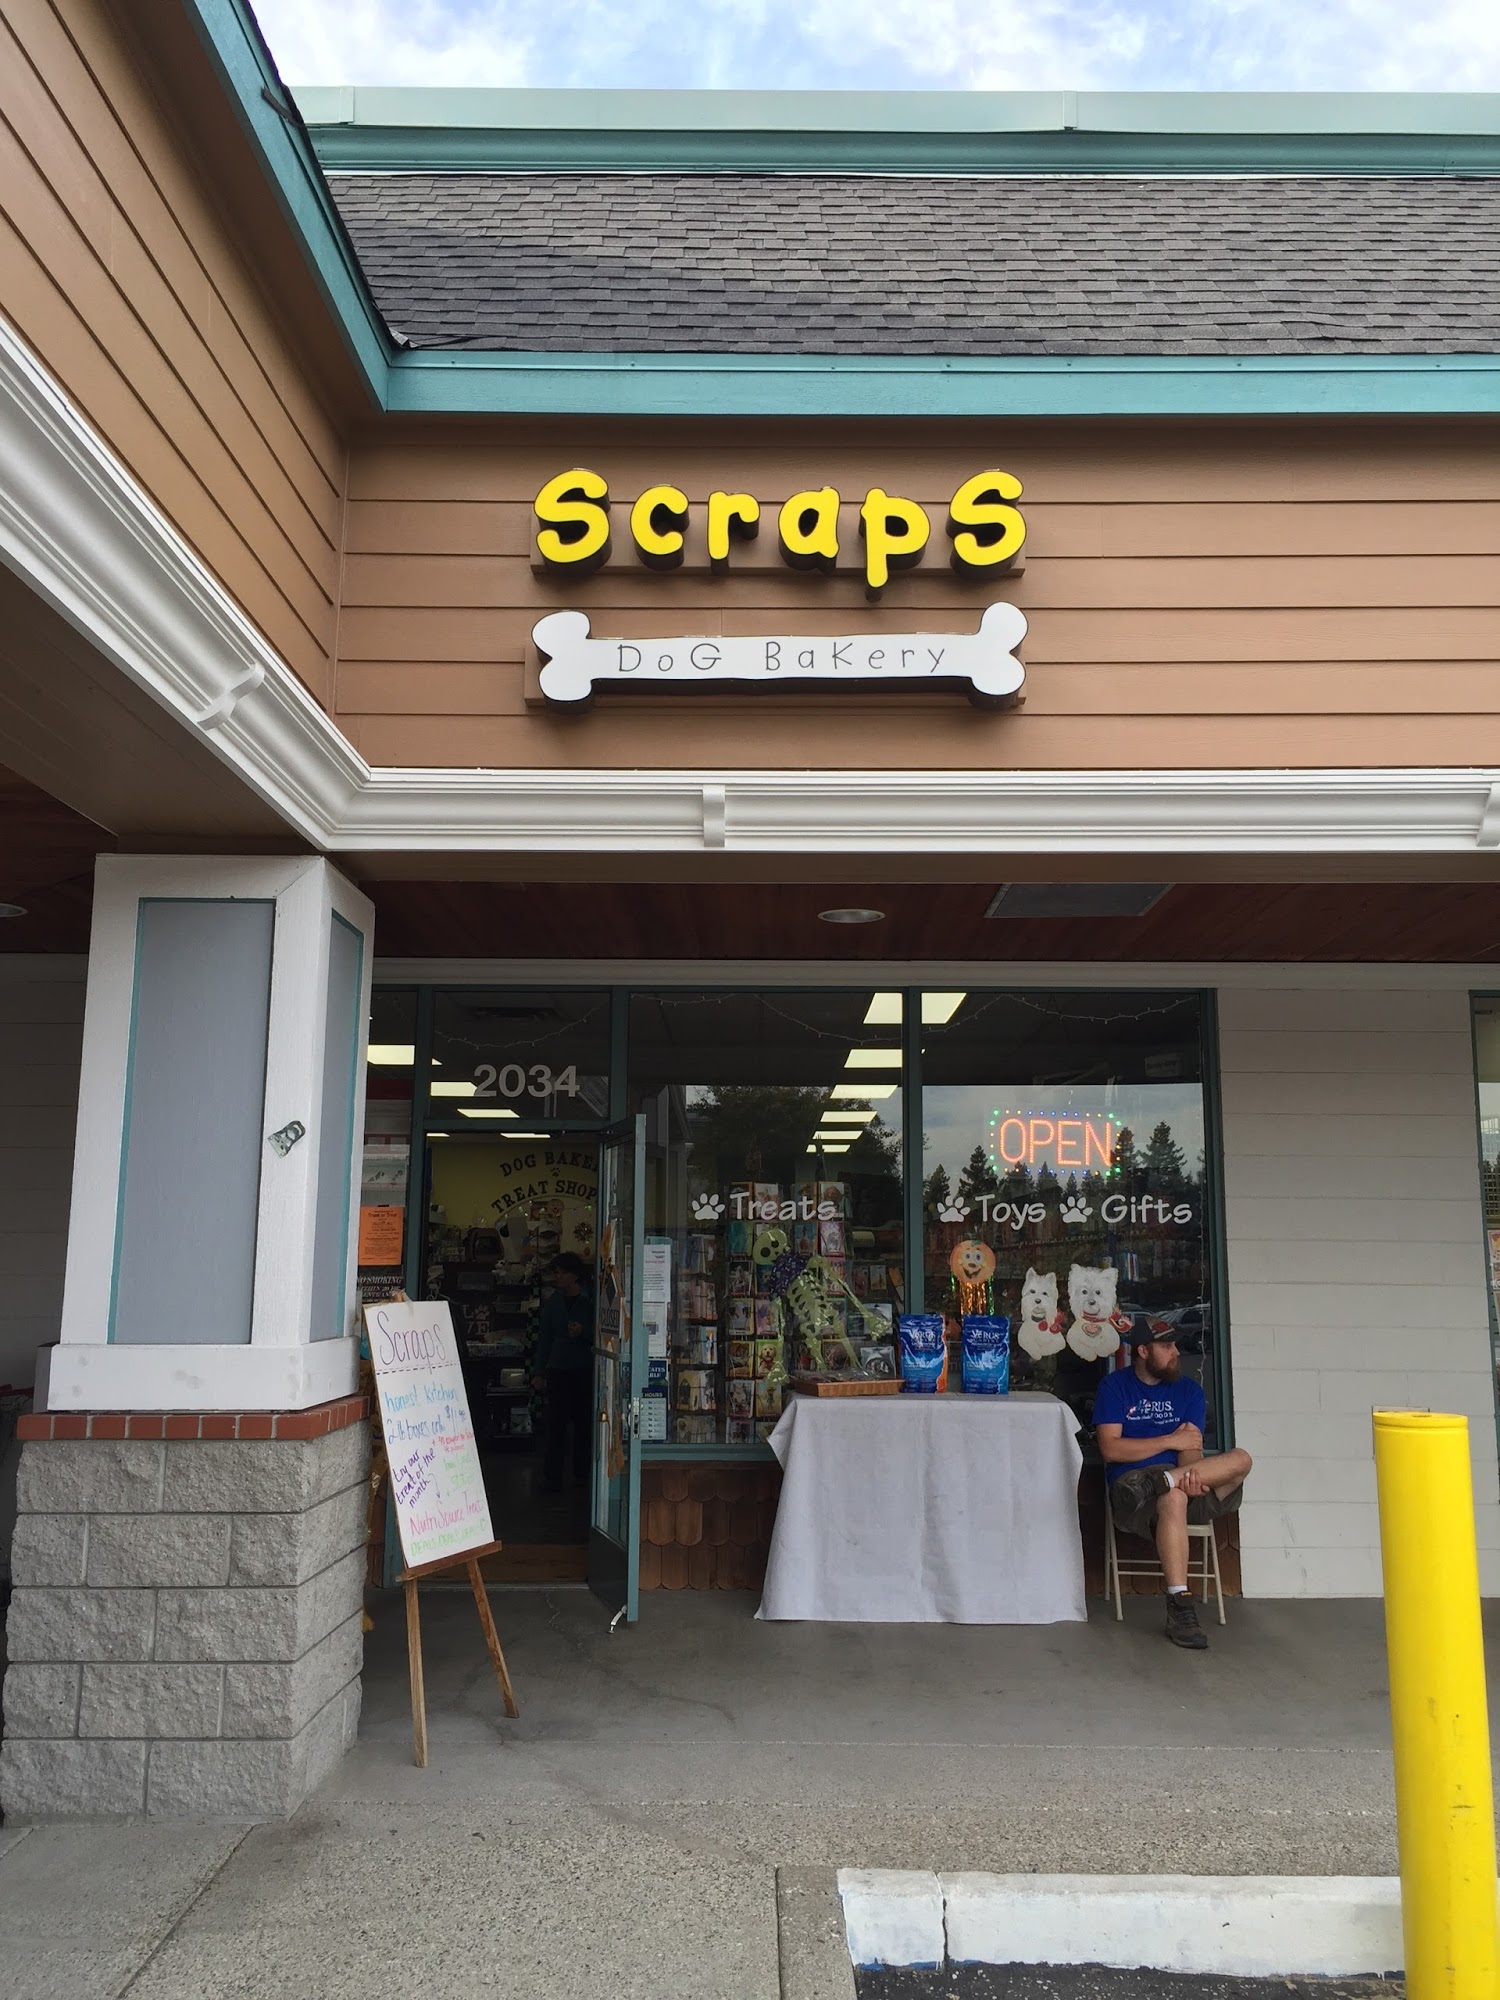 Scraps Dog Bakery at Mountain Mutts